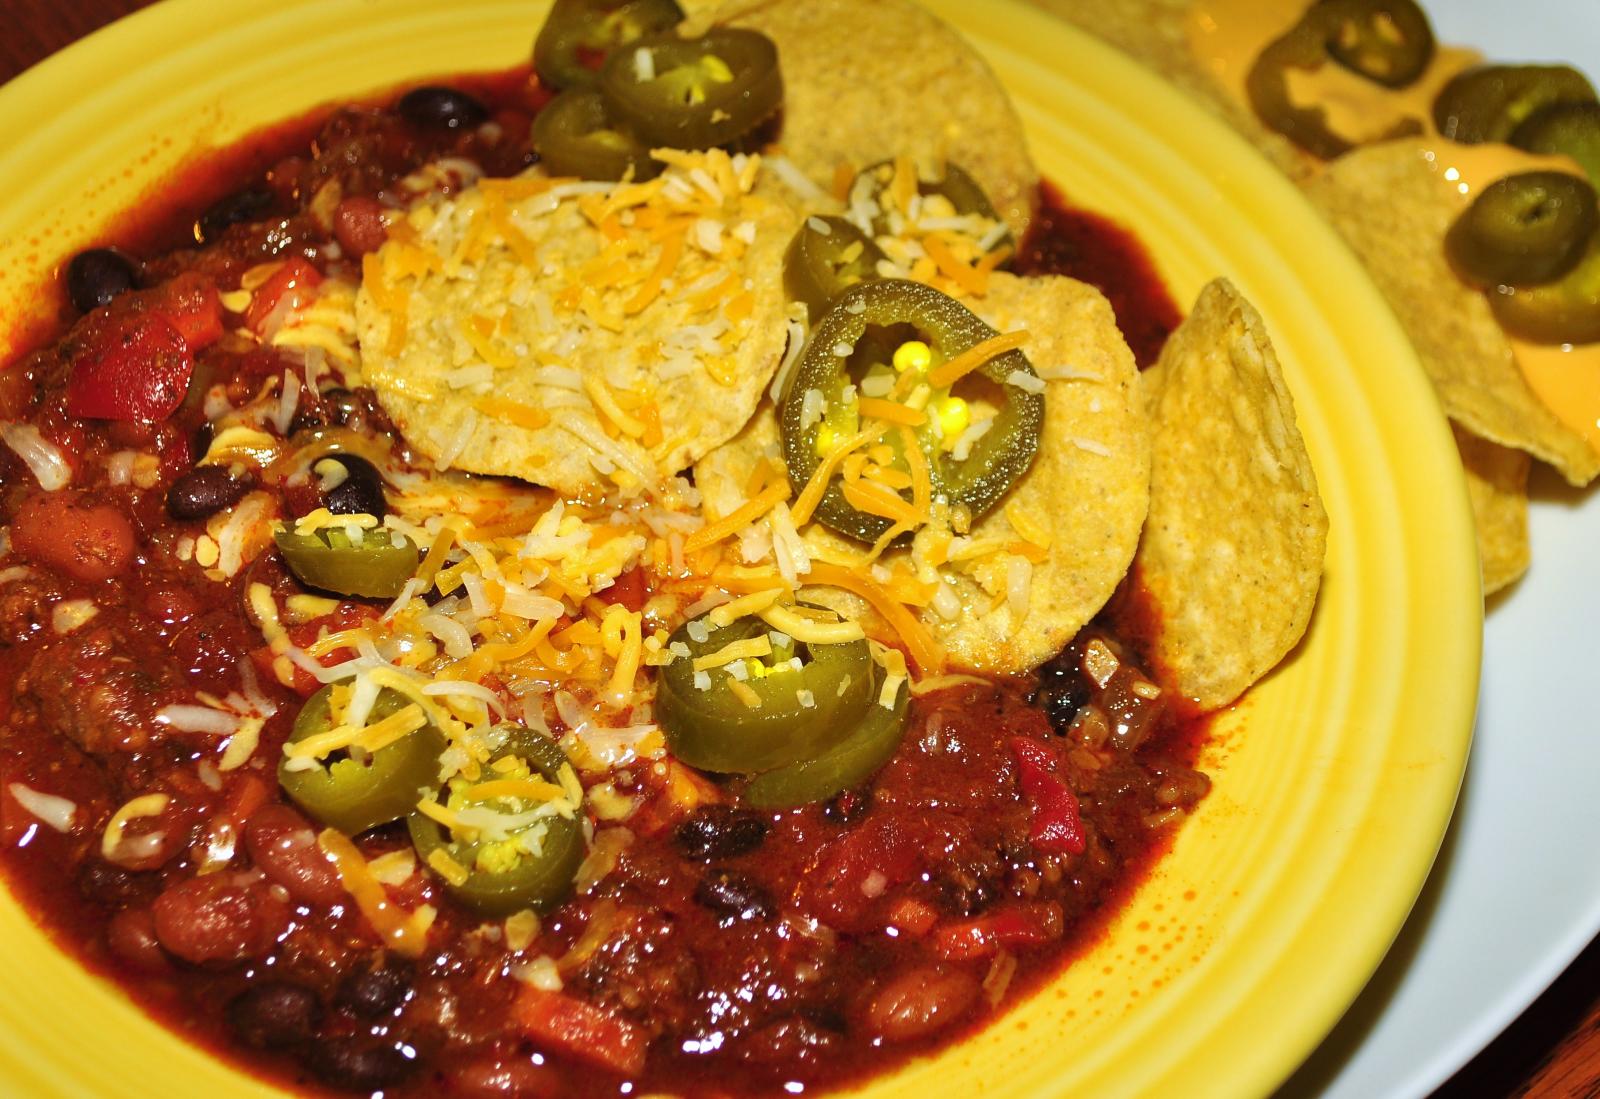 Tex Mex Chili With Beans The Border Cook Mexican And Tex Mex Cuisine